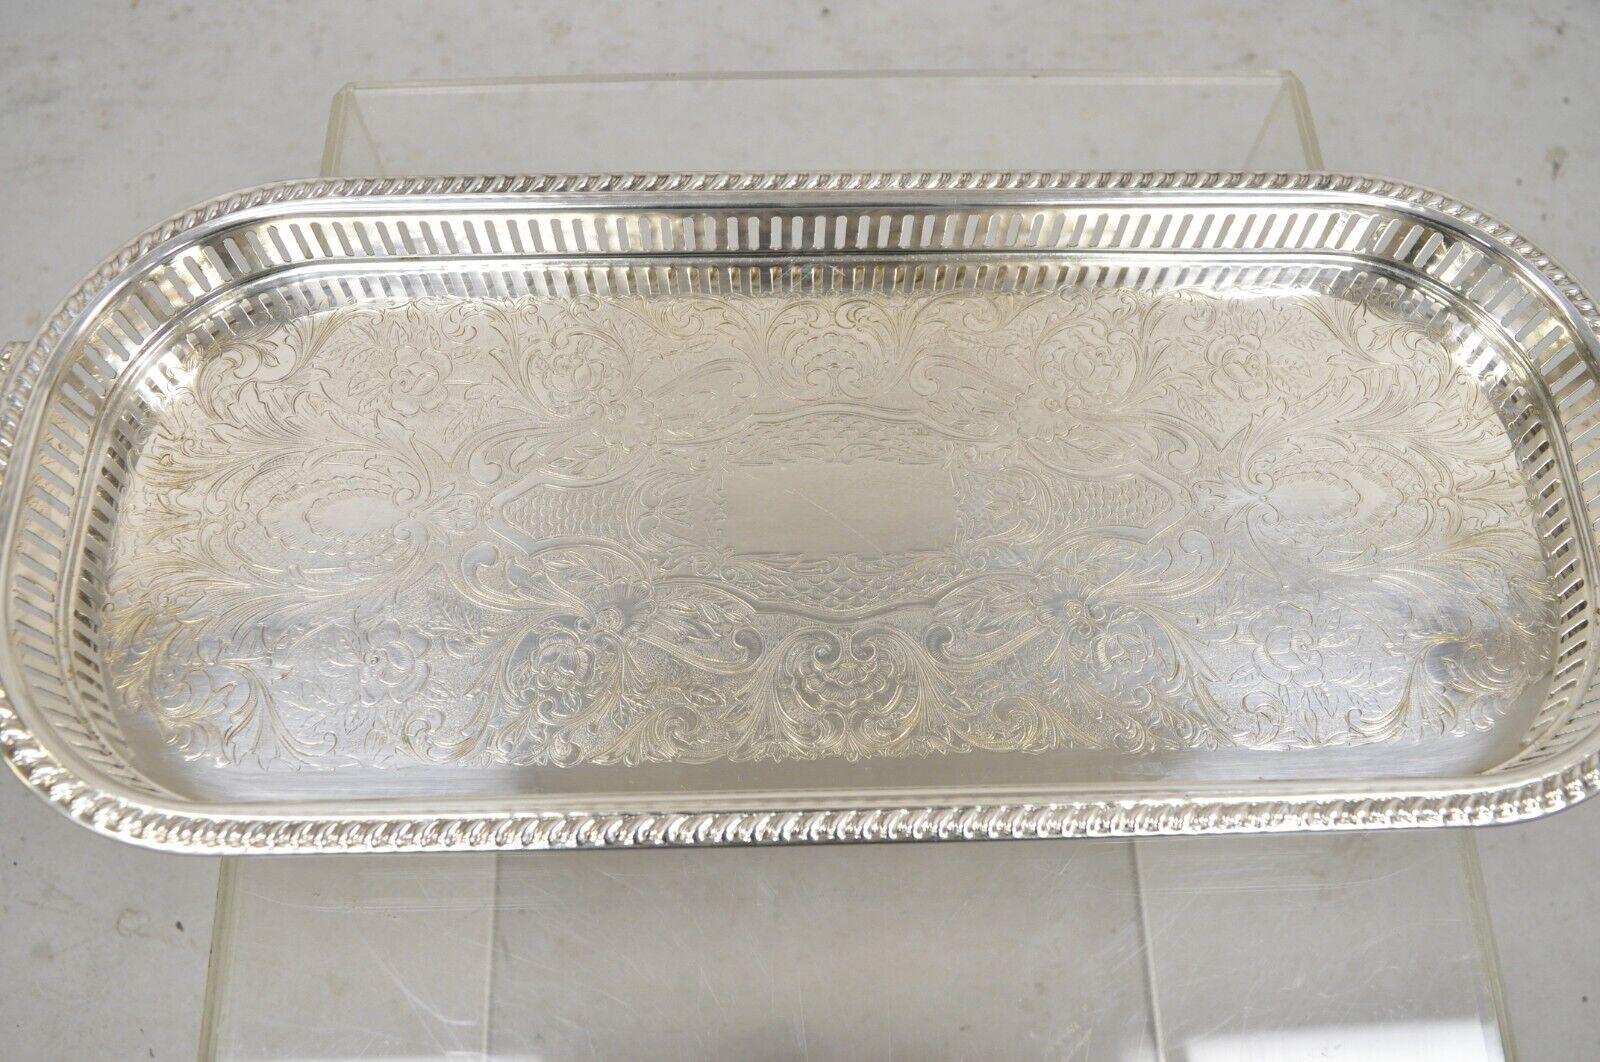 Vtg Victorian Style Silver Plated Narrow Oval Serving Platter Tray by Regency For Sale 3